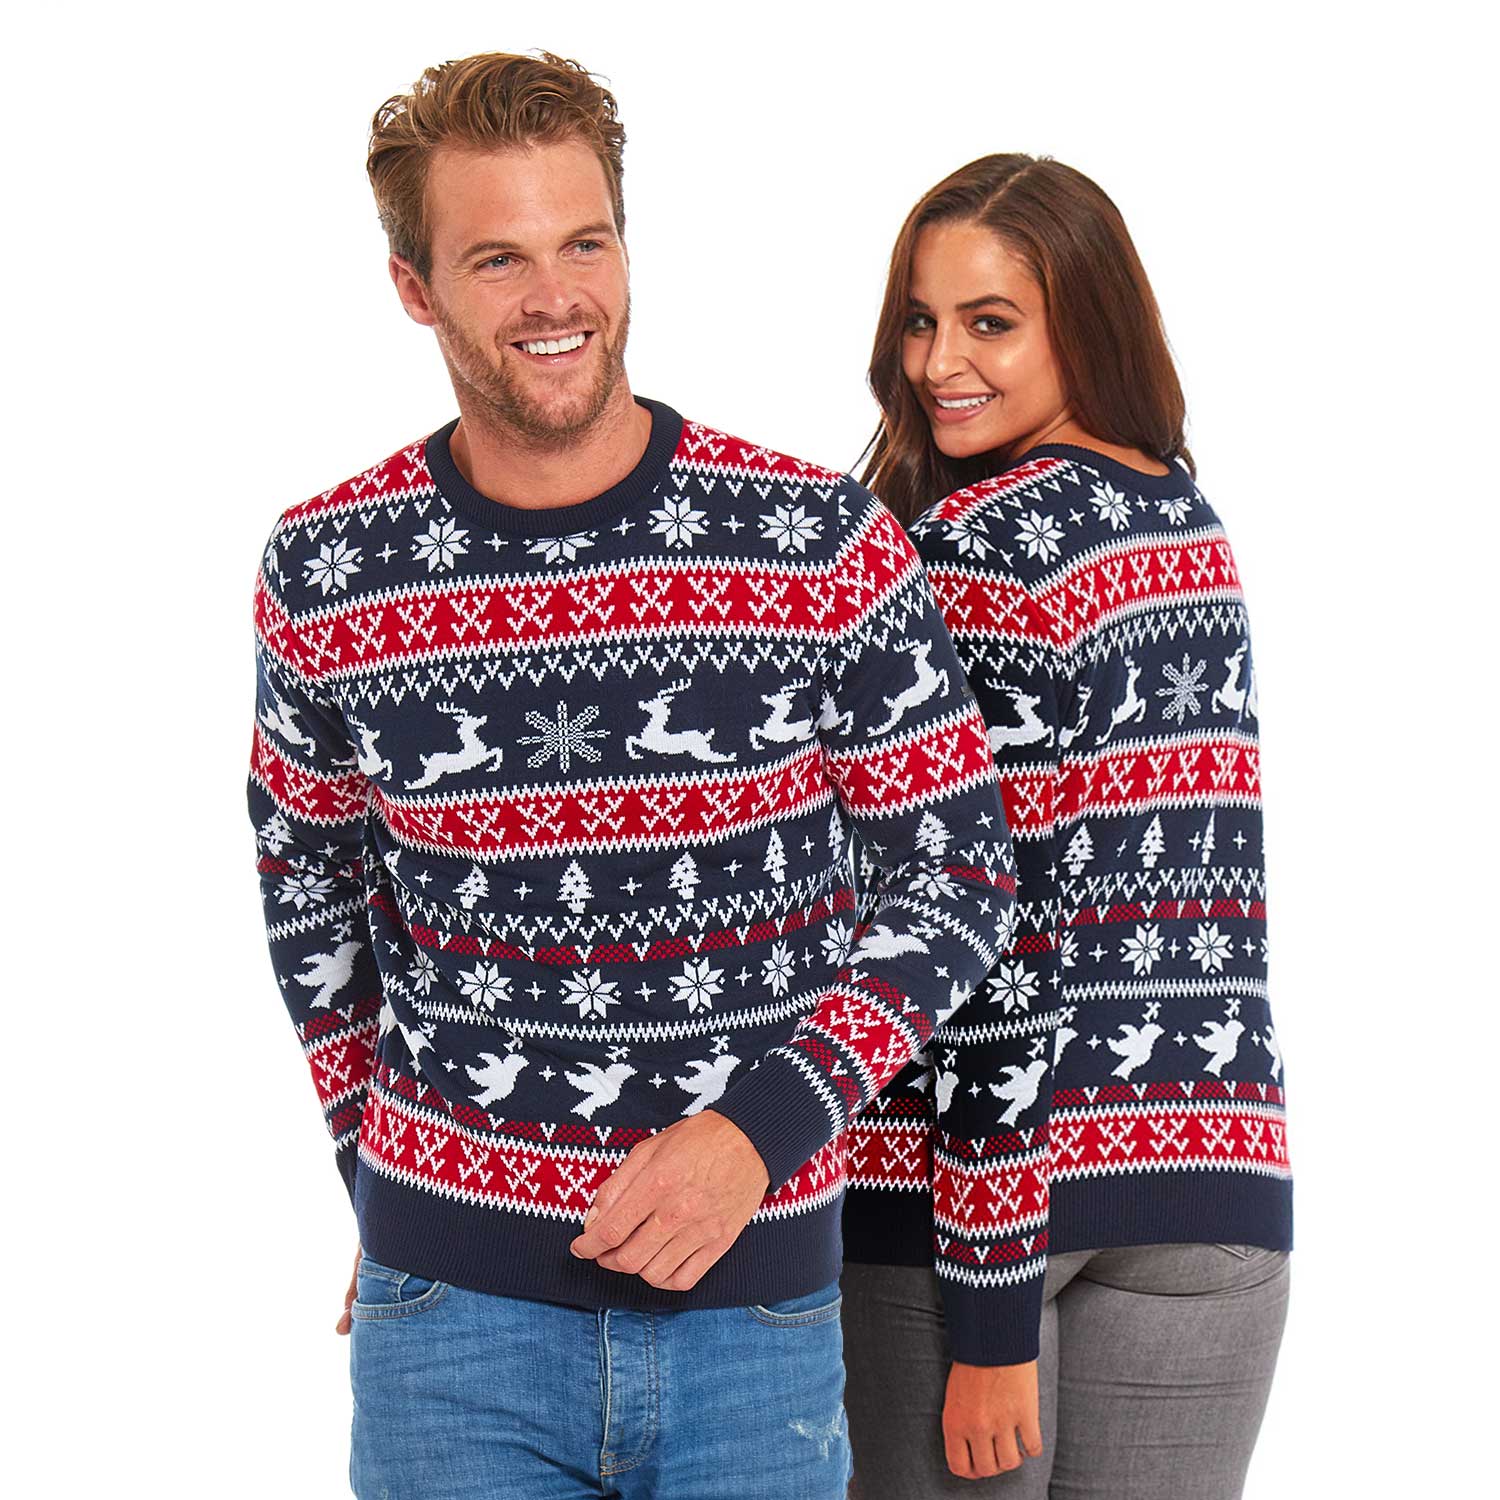 Feeling the Fair Isle Classic Couples Ugly Christmas Sweater